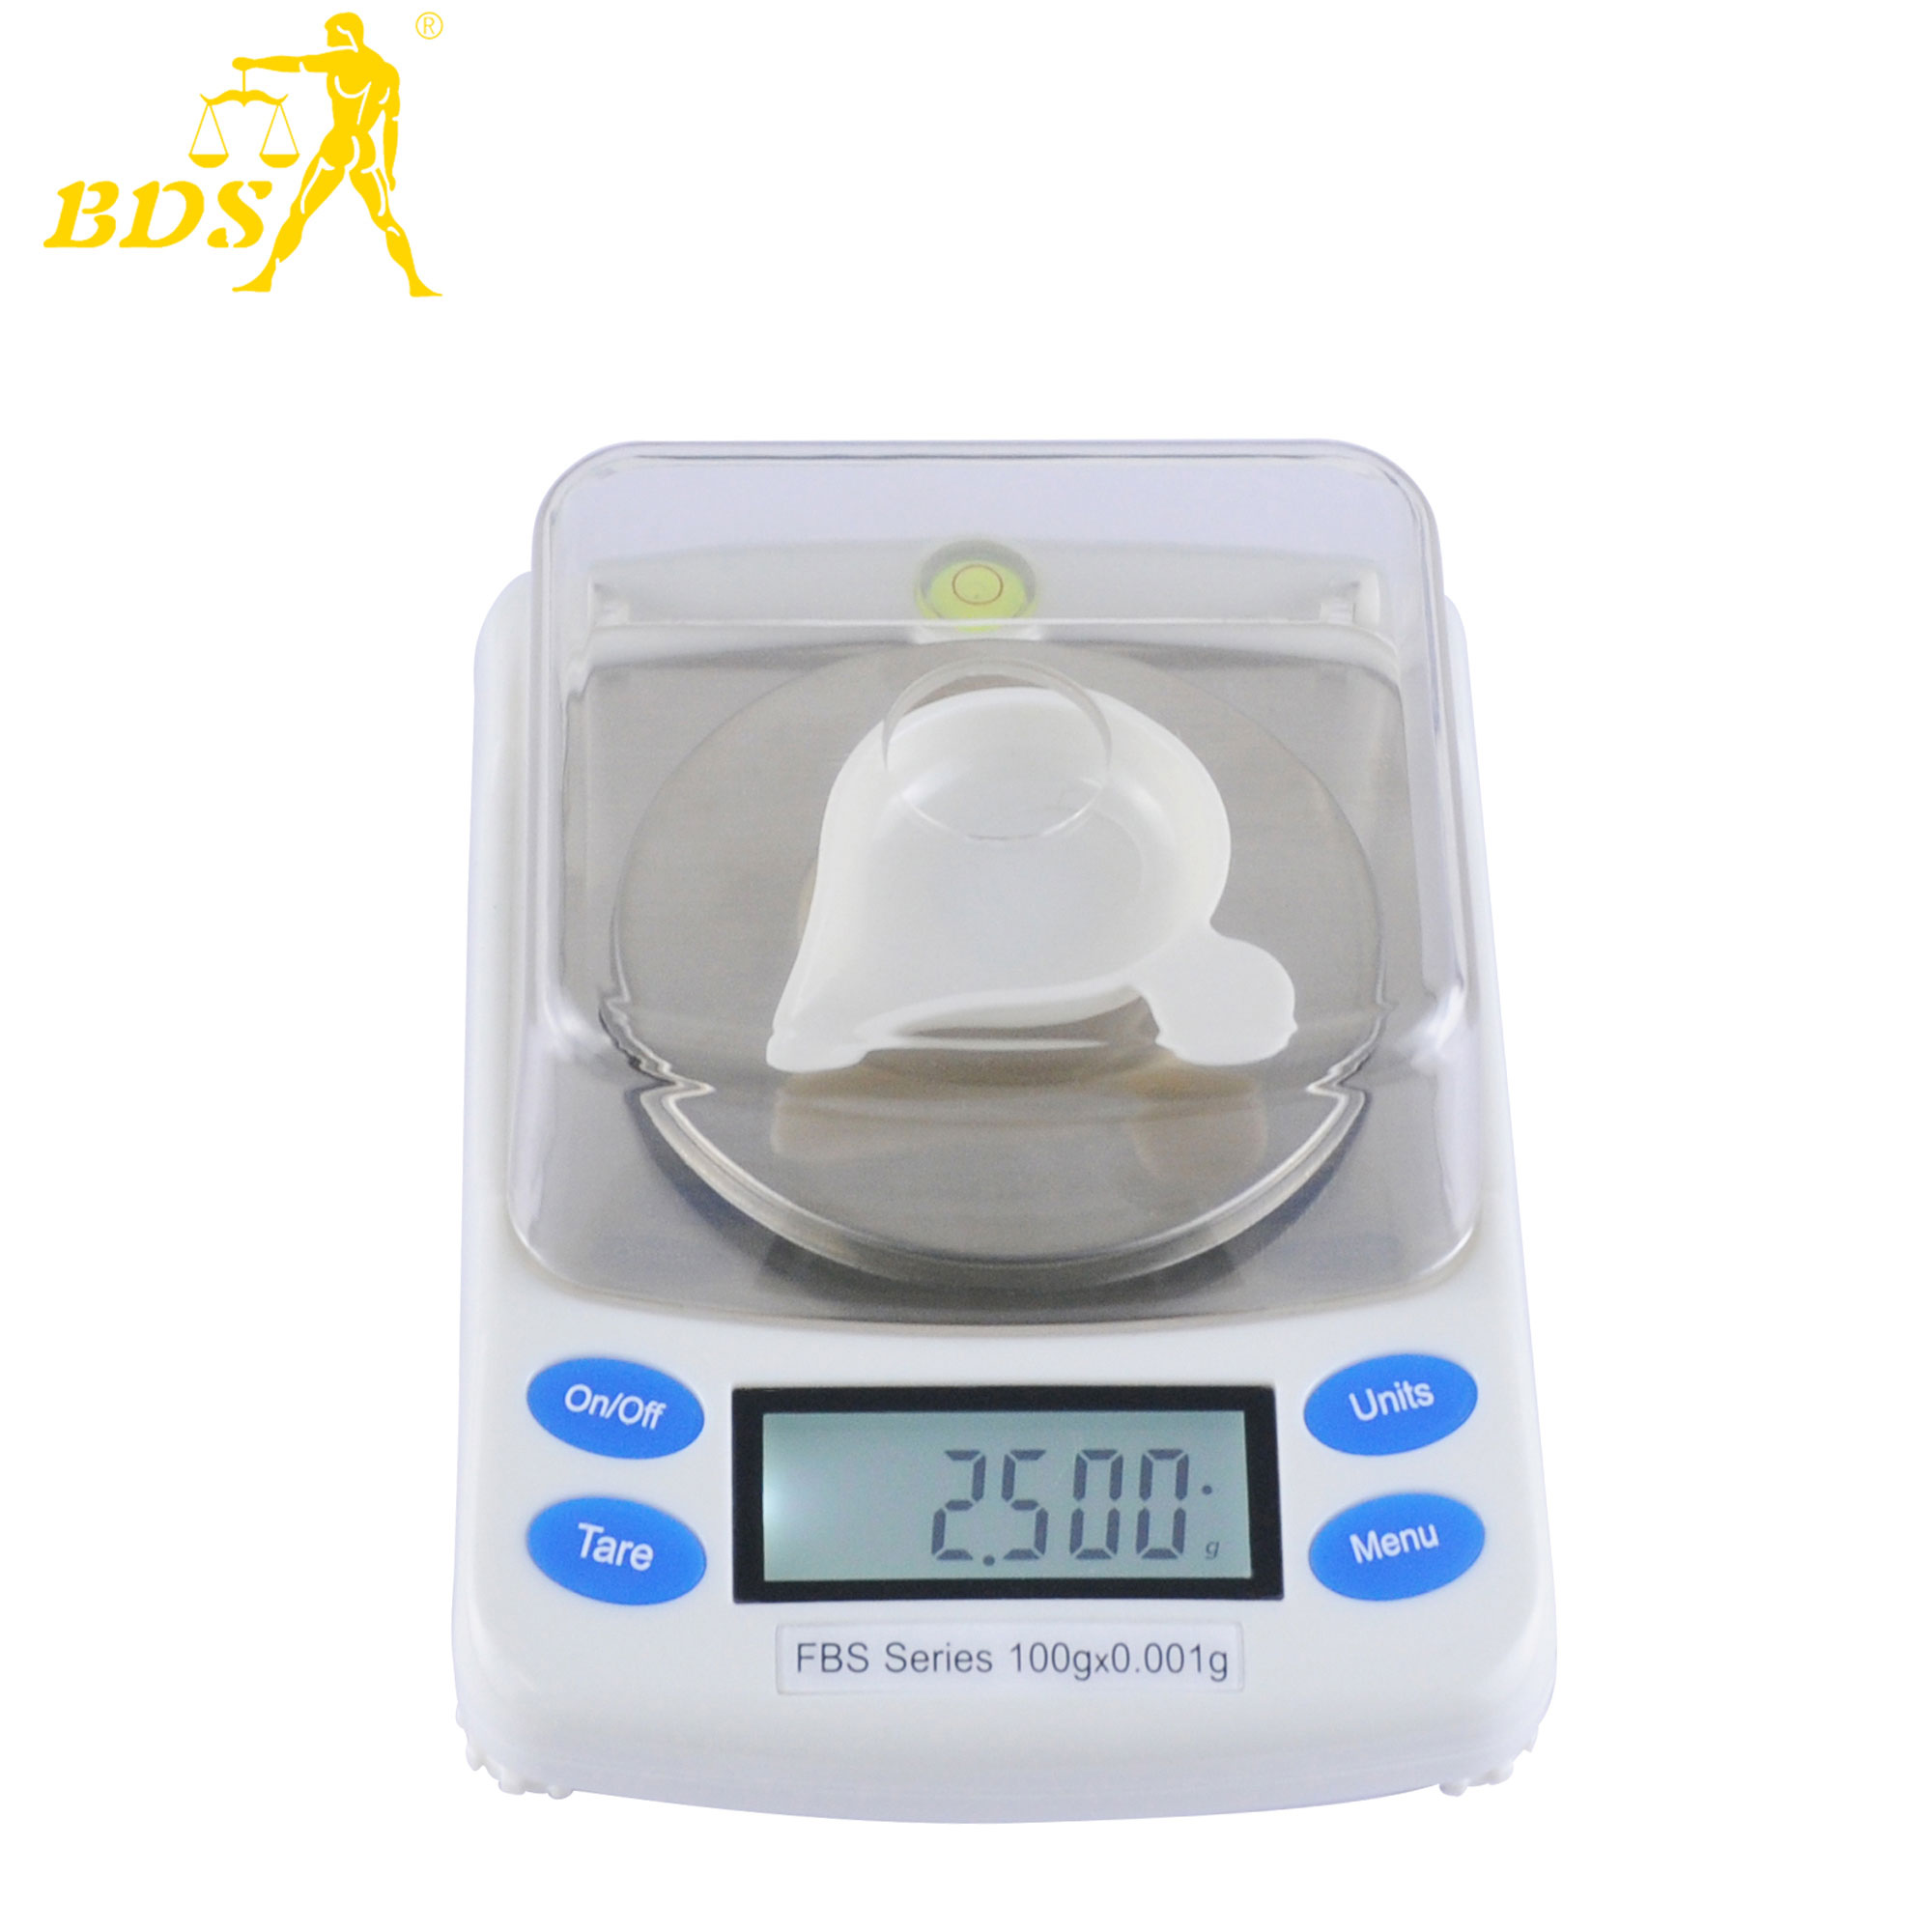 High precision 1mg carat scale digital jewelry scale powder scale analytical weighing balance